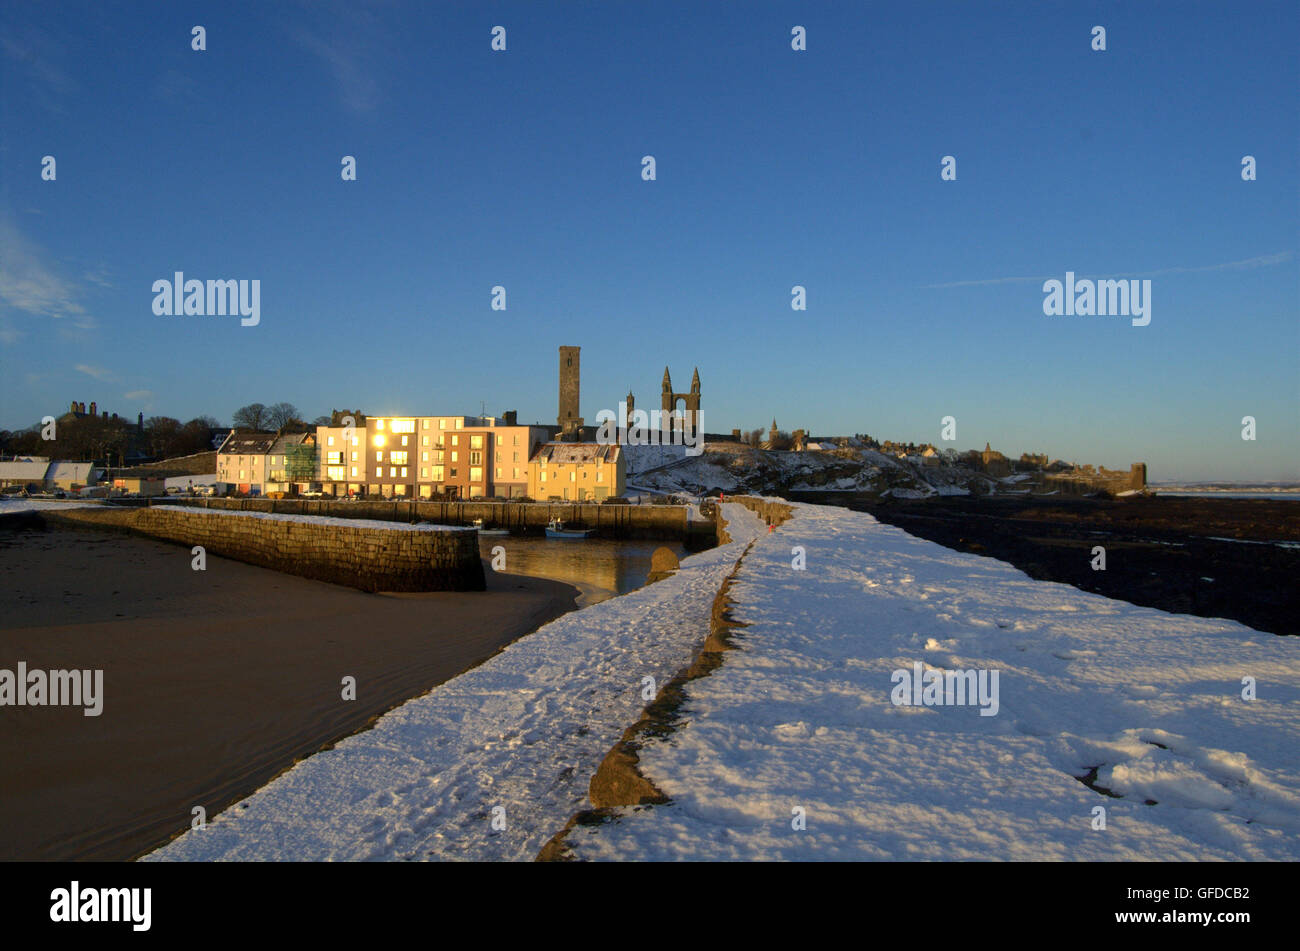 View of St Andrews from the pier in the snow, St Andrews, Fife, Scotland Stock Photo